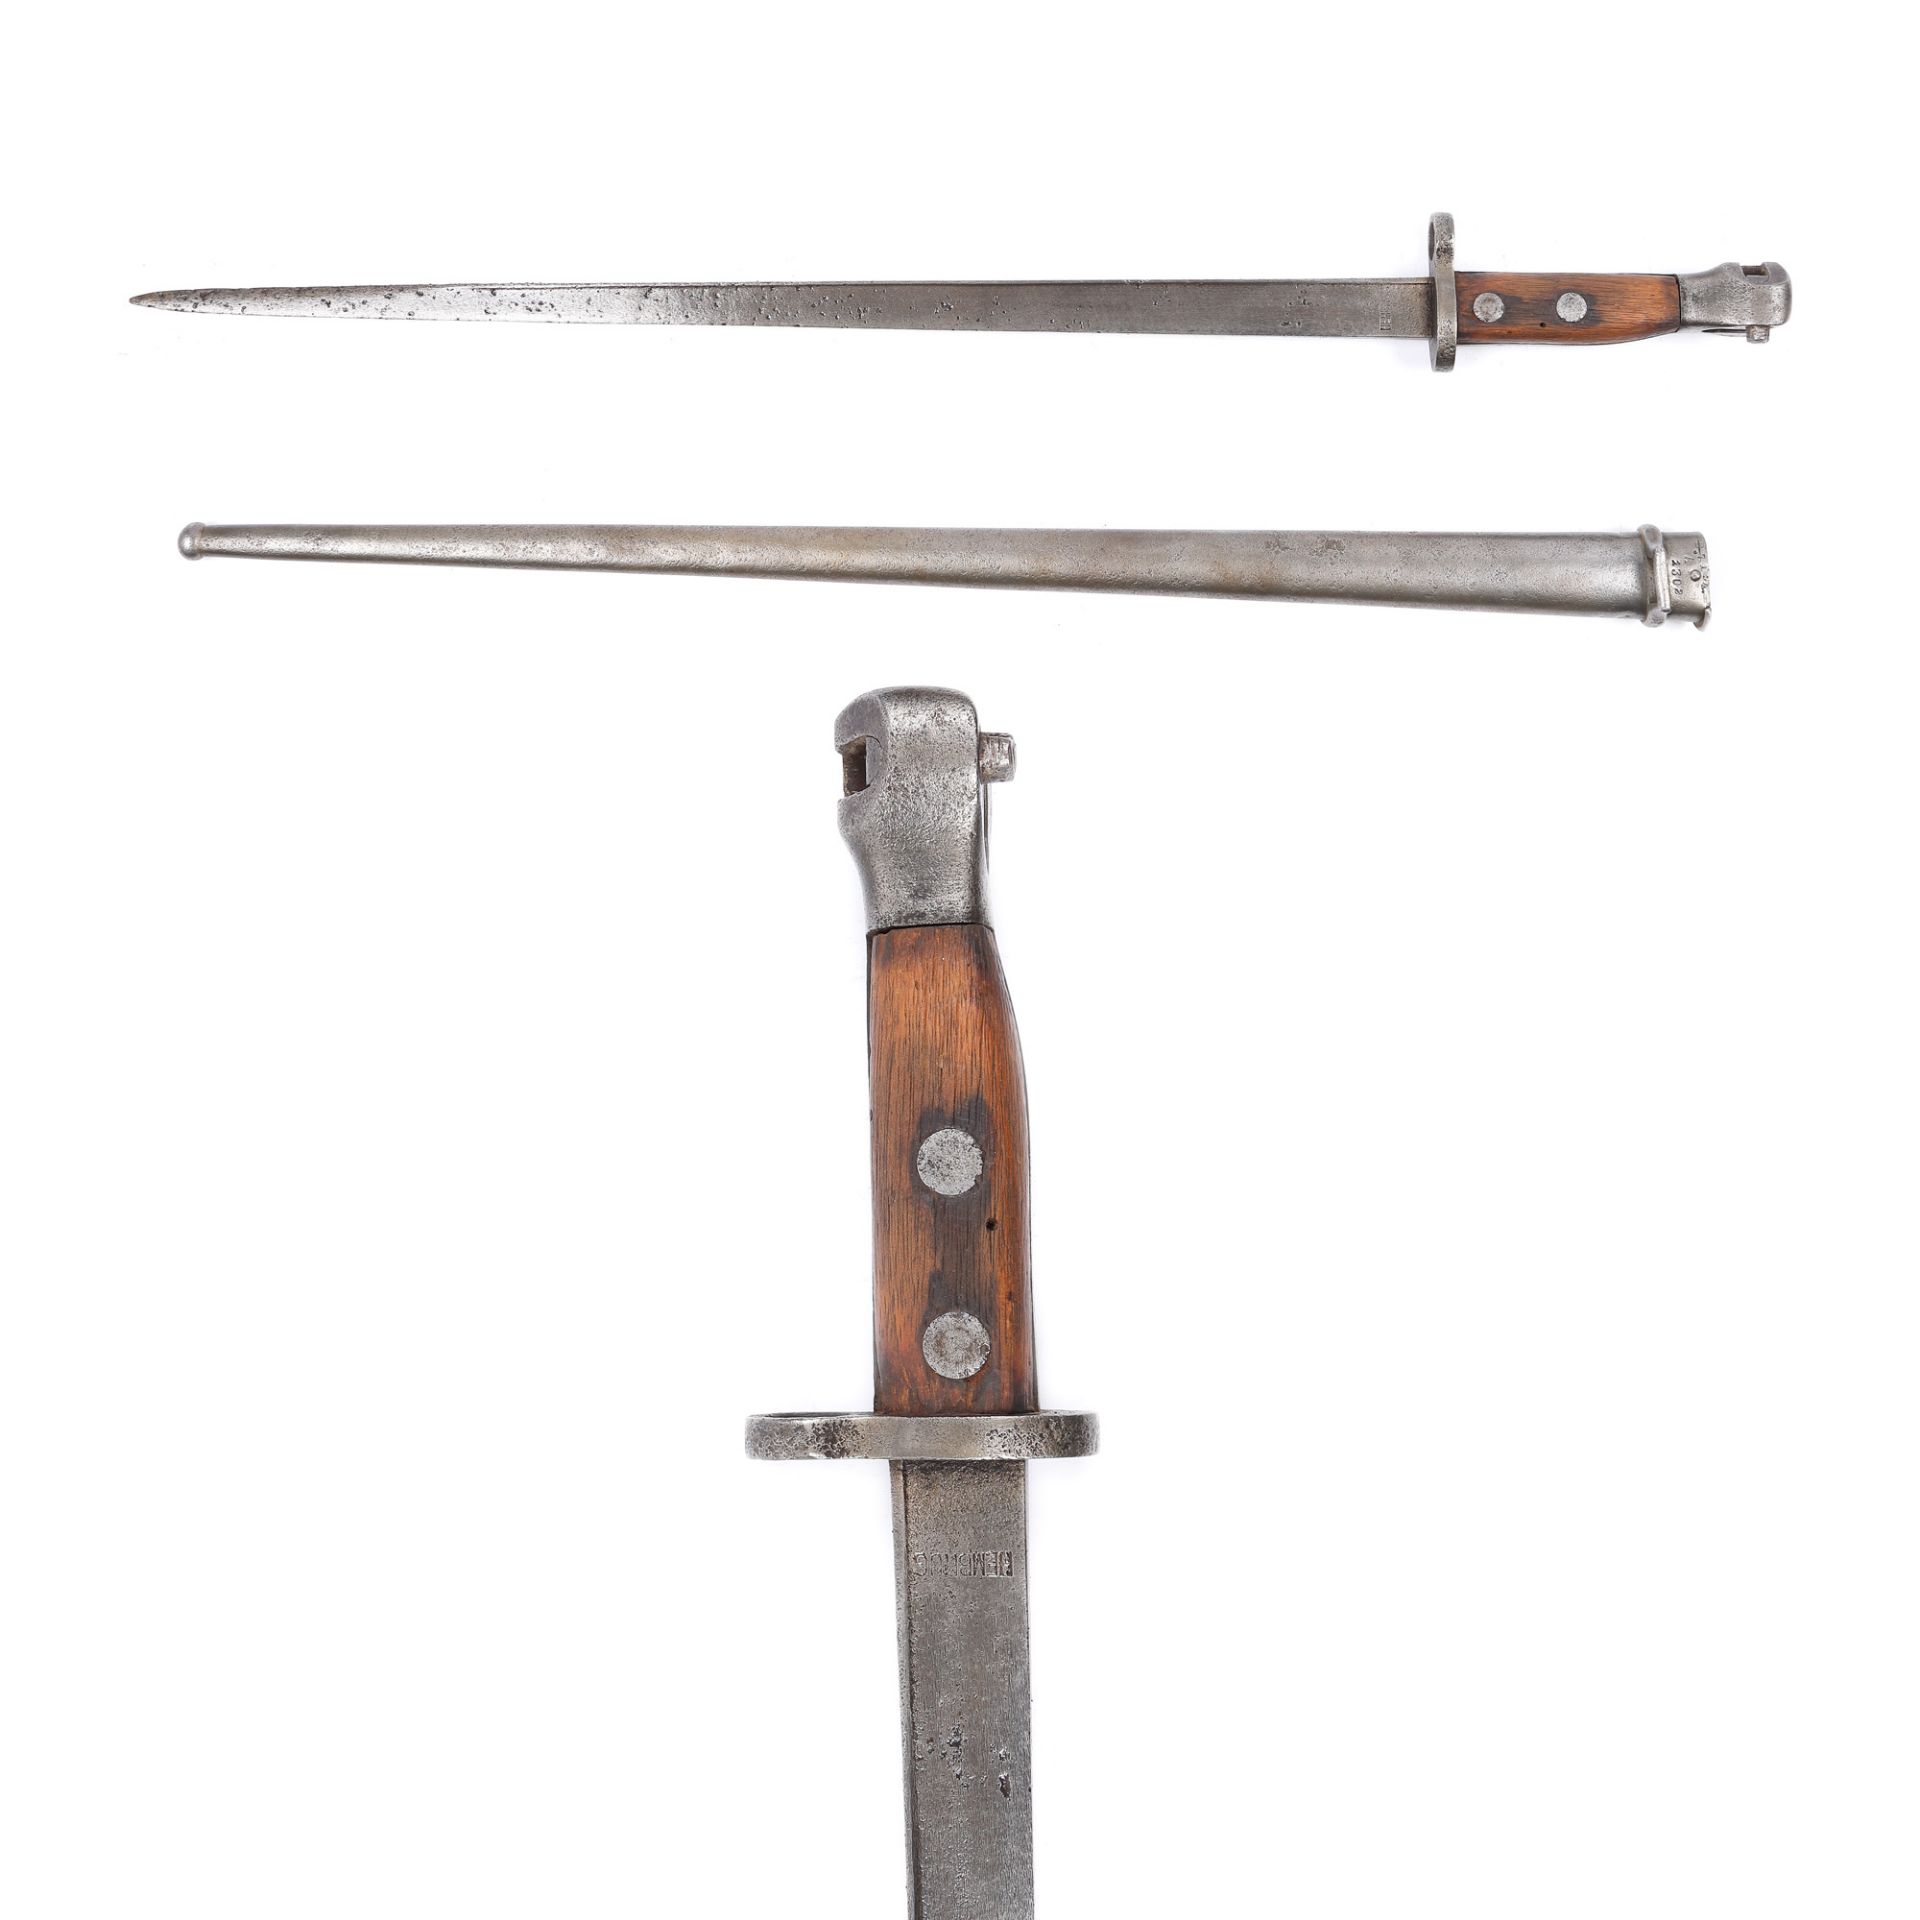 Bayonet for Mannlicher rifle, with sheath, model 1895, Netherlands, early 20th century